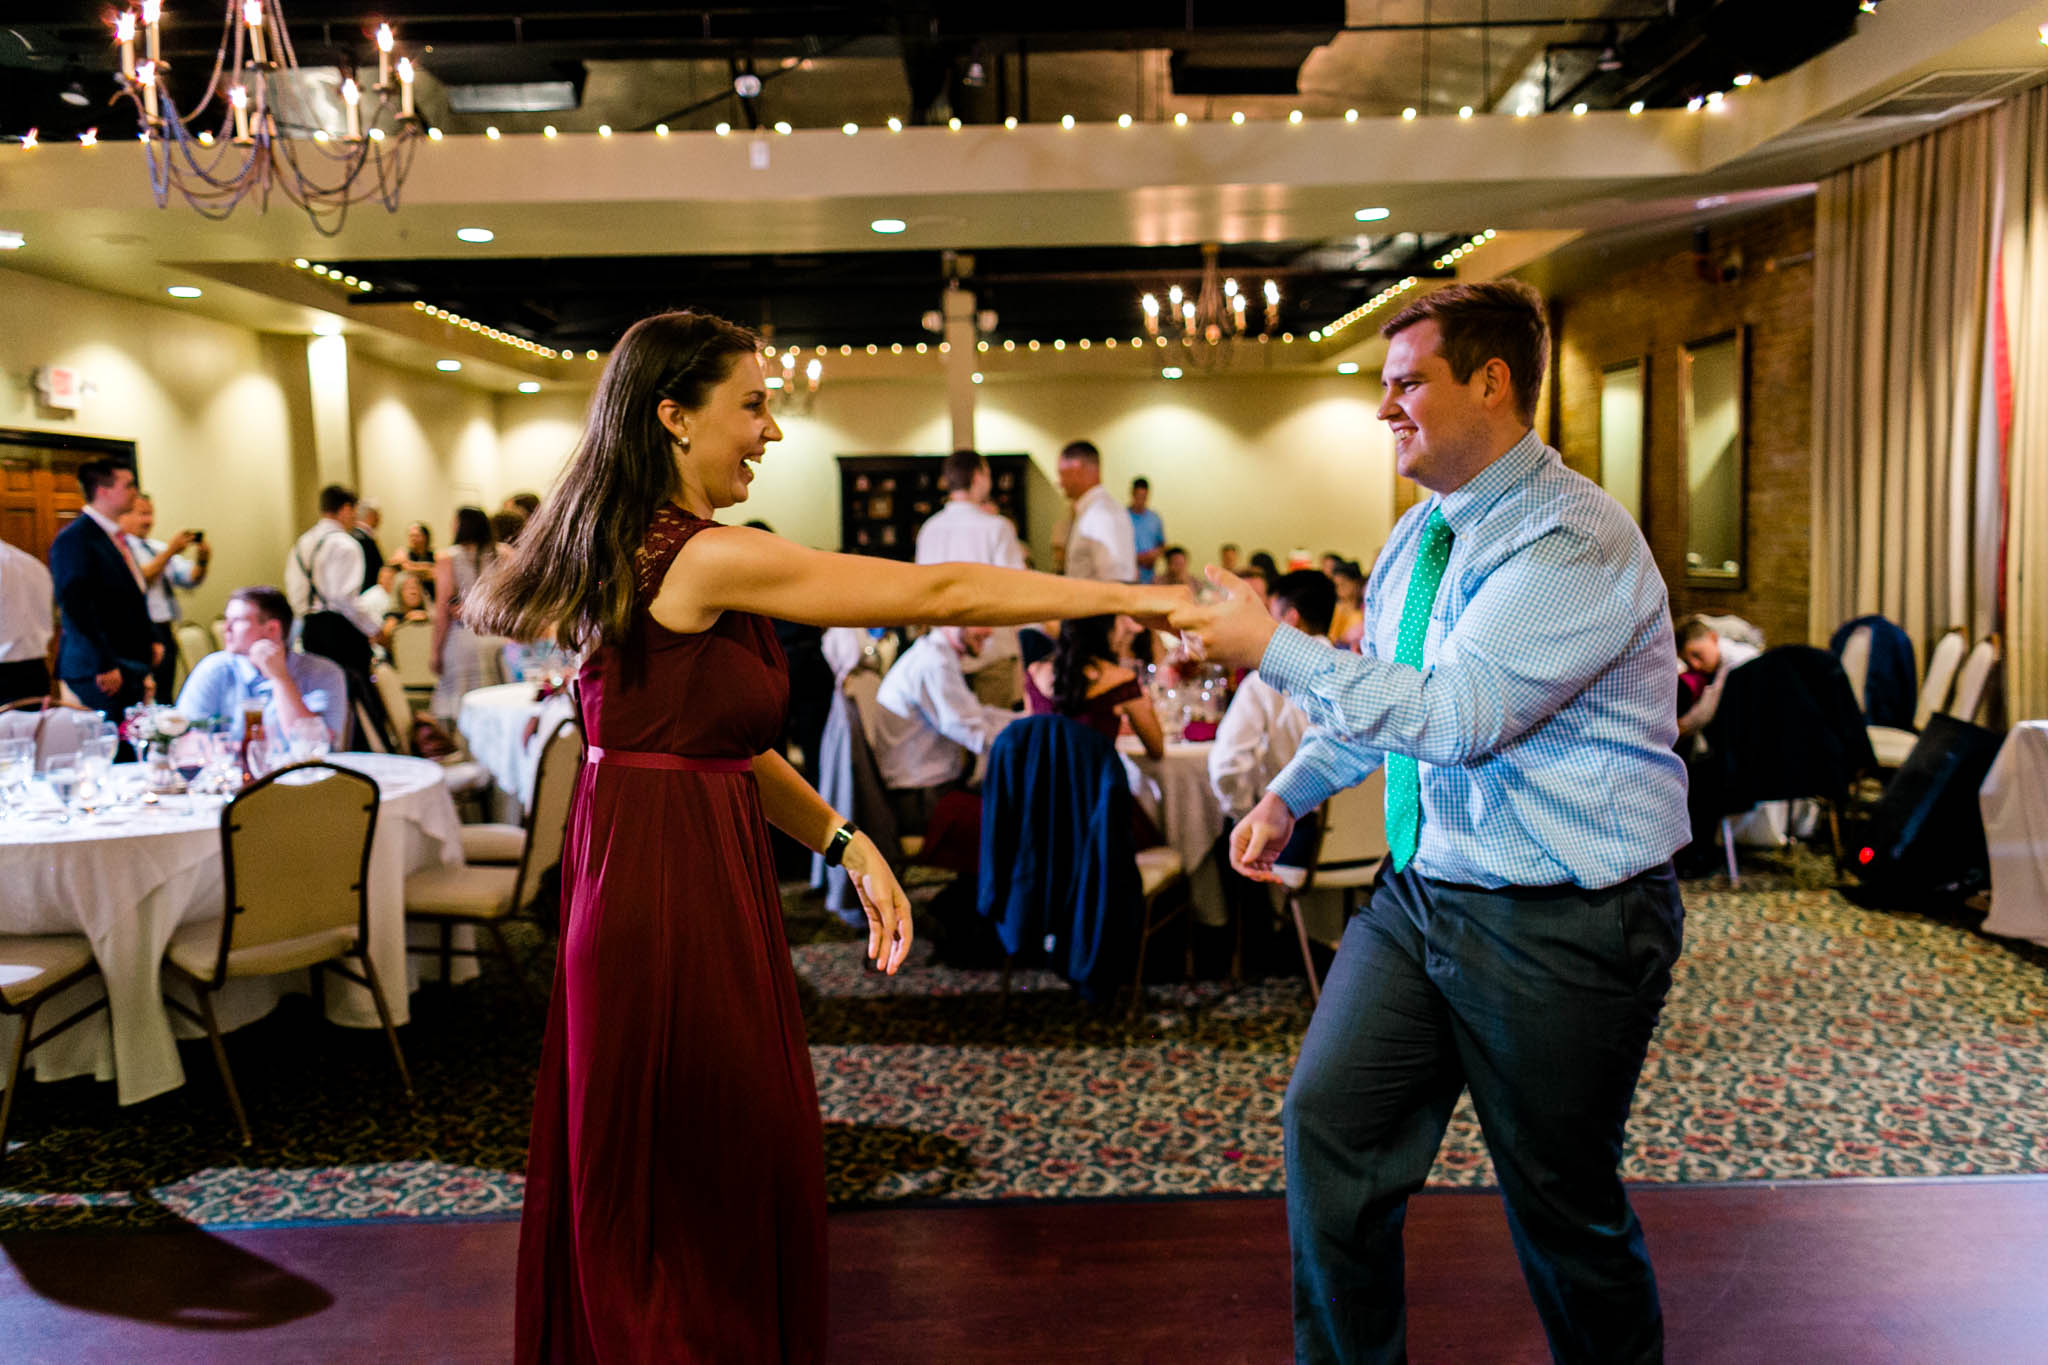 Man and woman dancing | Royal Banquet Hall |People dancing at wedding reception at Royal Banquet Conference Center | Raleigh Wedding Photographer | By G. Lin Photography